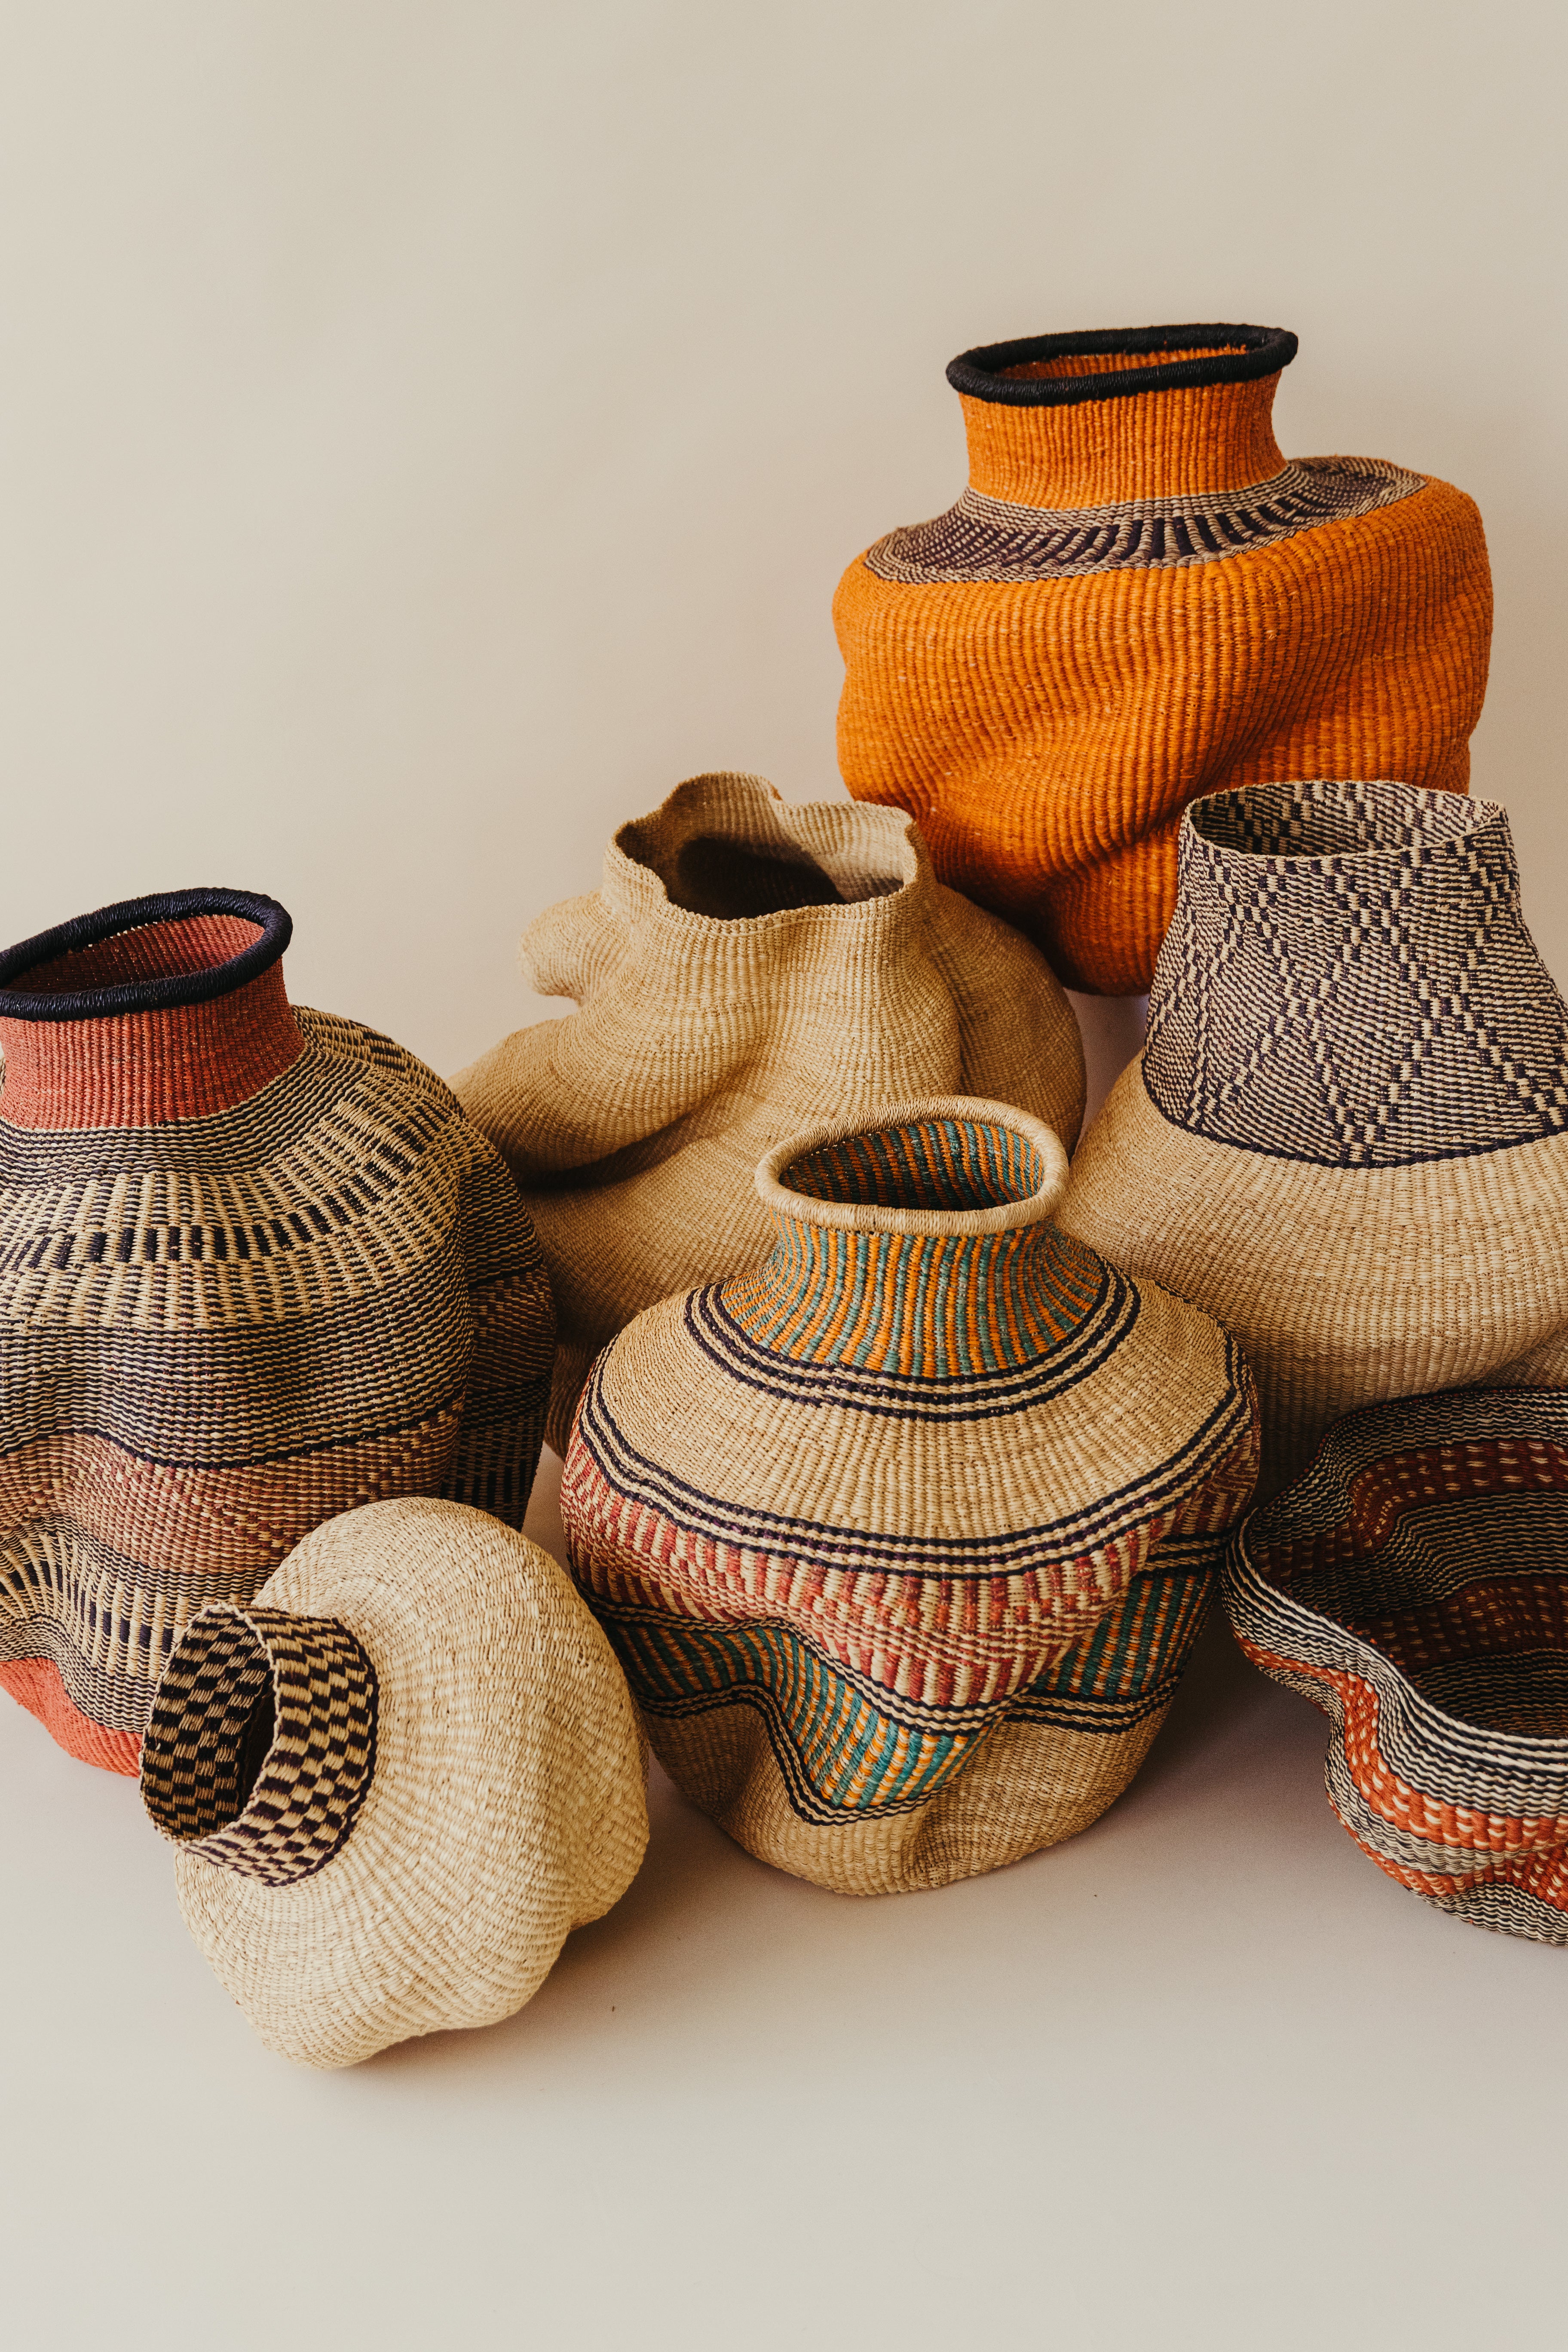 African Art Baskets: The Ghana Collection